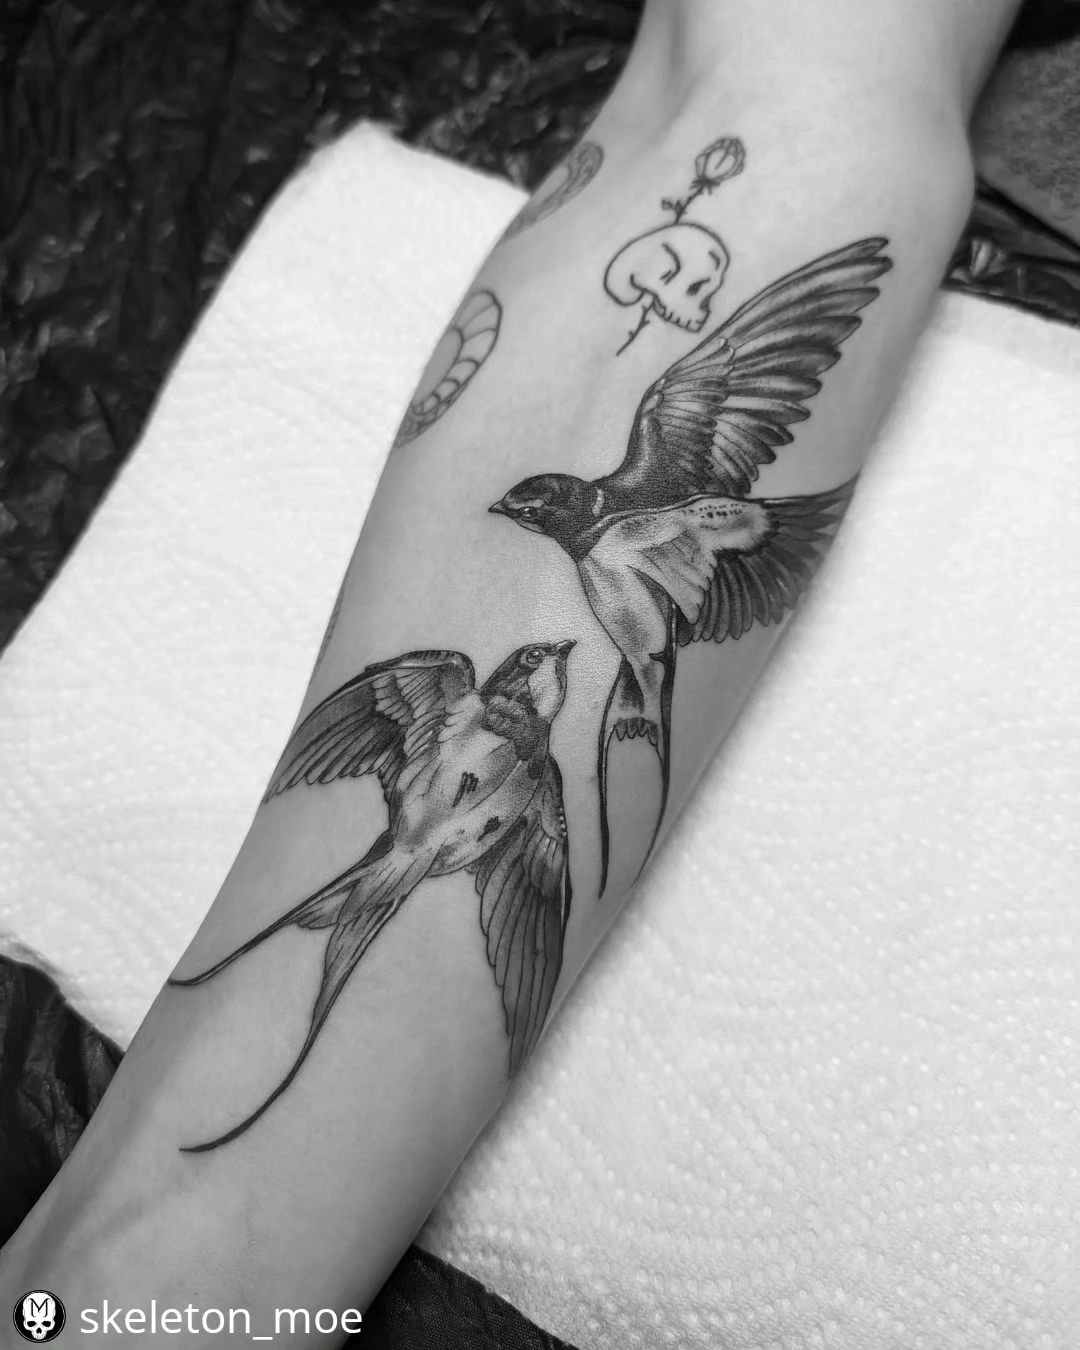 Swallows ♡@skeleton_moe
• • • • • •
Swallows for Abel. Thanks for the visit!
-
#